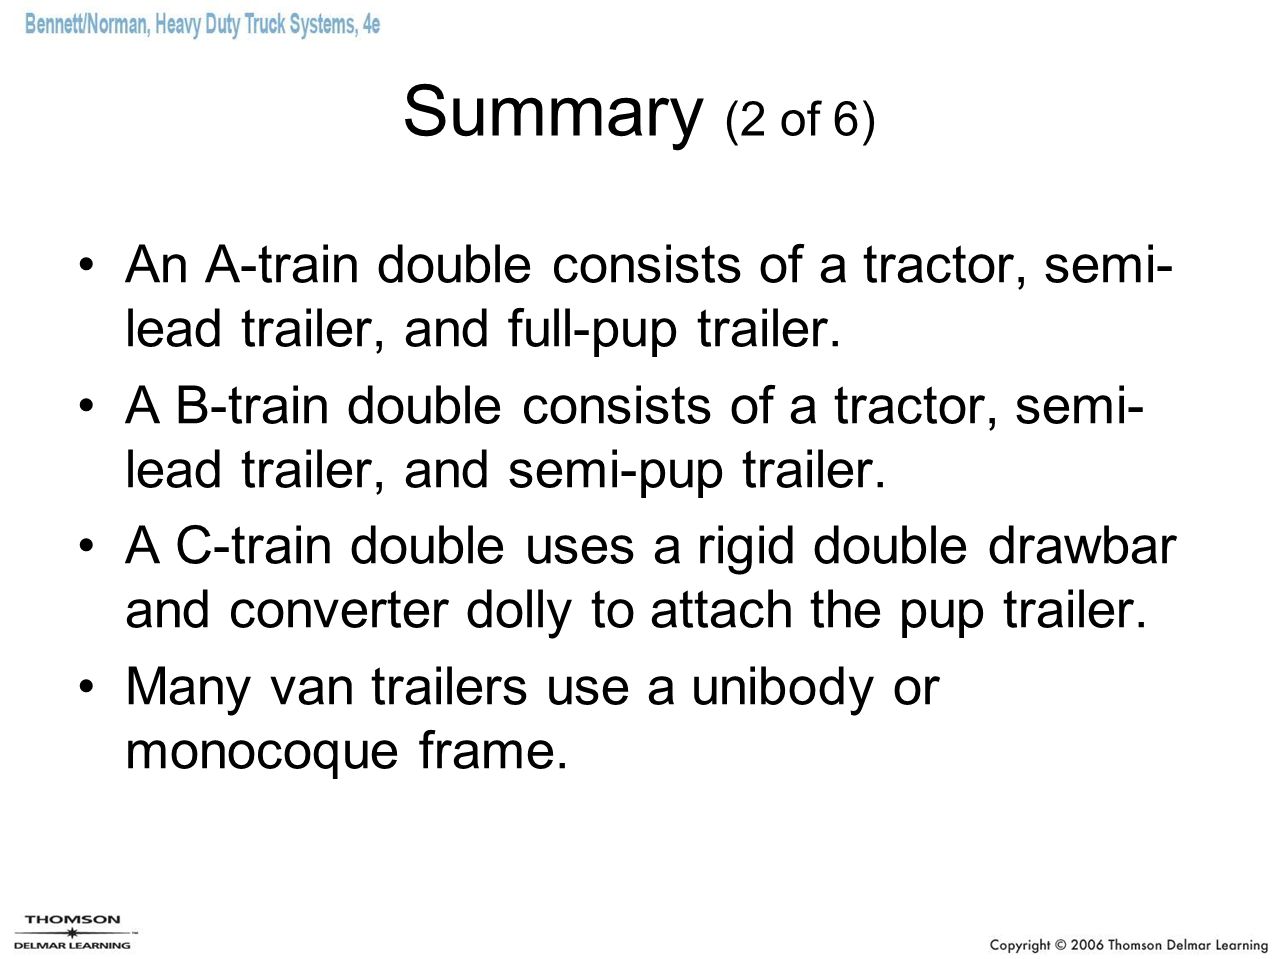 Summary (2 of 6) An A-train double consists of a tractor, semi- lead trailer, and full-pup trailer.